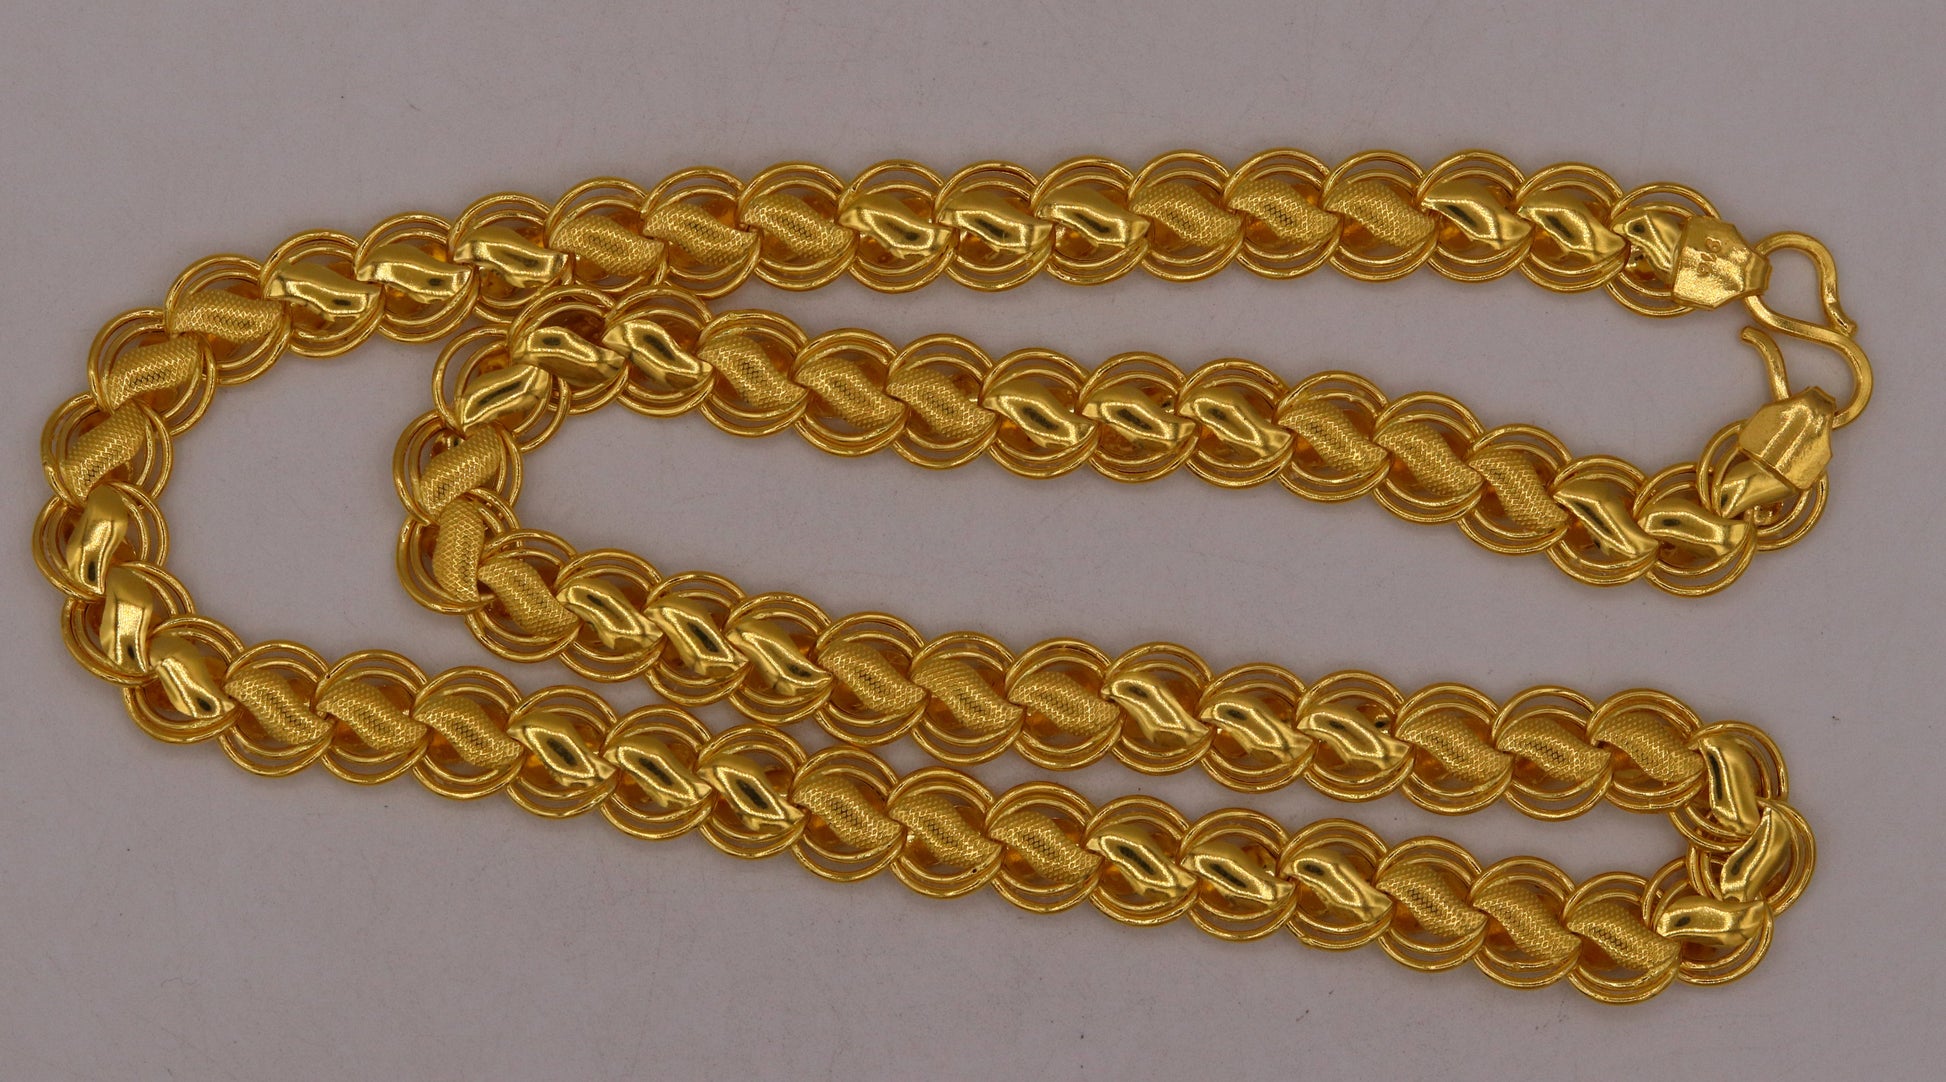 24 inches 22k yellow solid gold handmade fabulous lotus chain necklace excellent gold unisex chain ch139 - TRIBAL ORNAMENTS